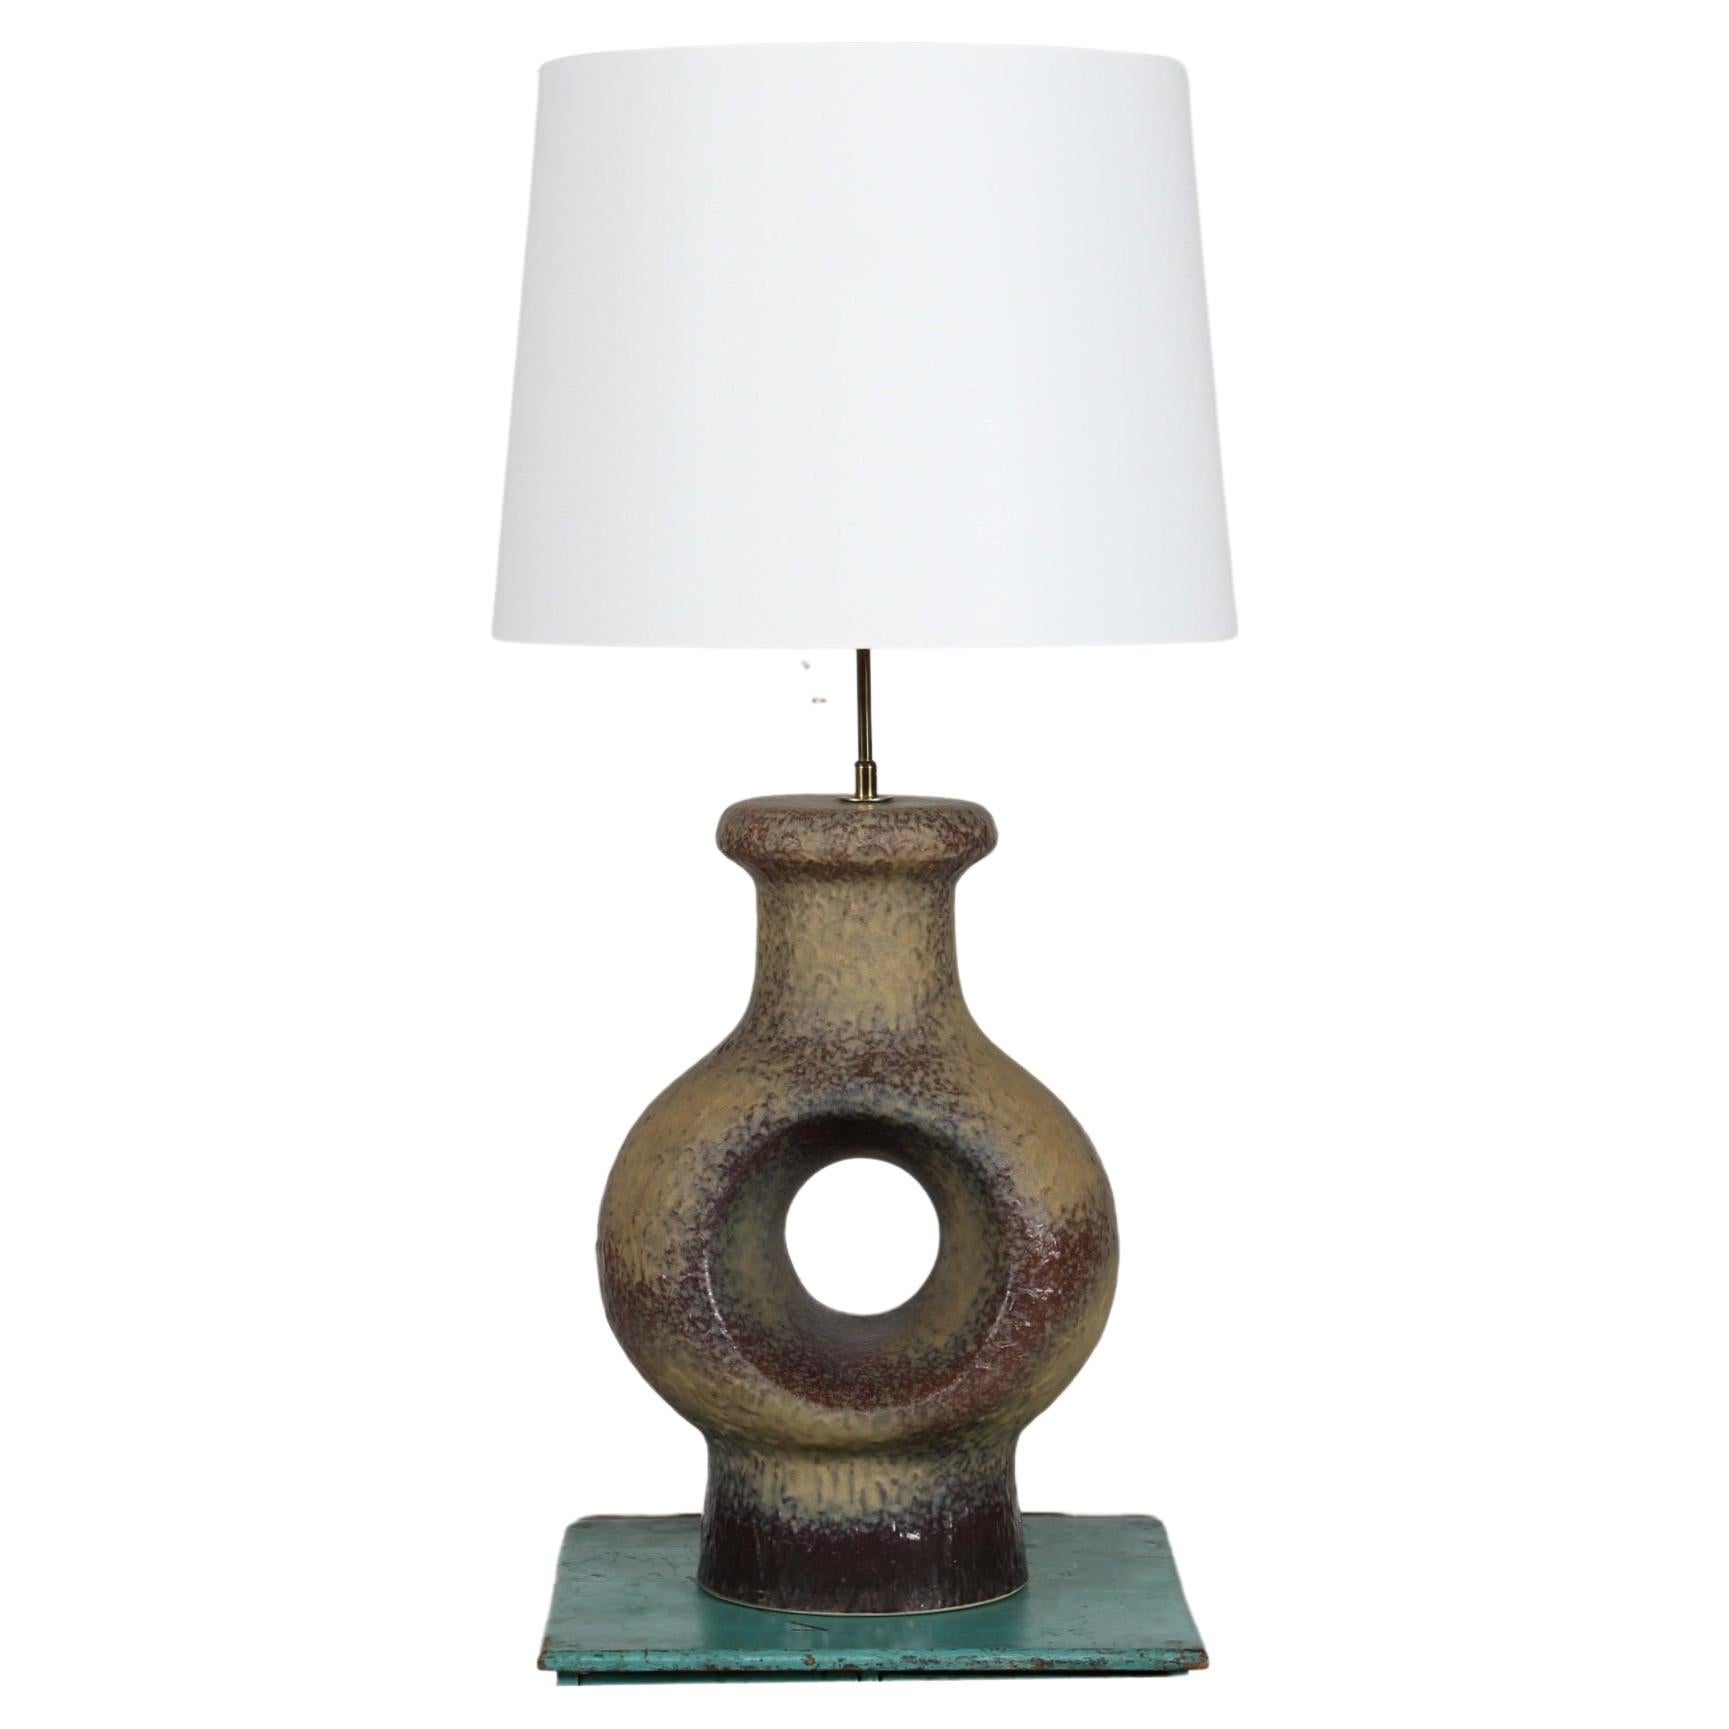 HUGE mid-century brutalist style Danish ceramic table lamp made in the 1970s.

The sculptural lamp base in Sejer Keramik style is made of cast ceramic with glaze in grey colors with a dash of green.

Included is a new lampshade designed in Denmark.